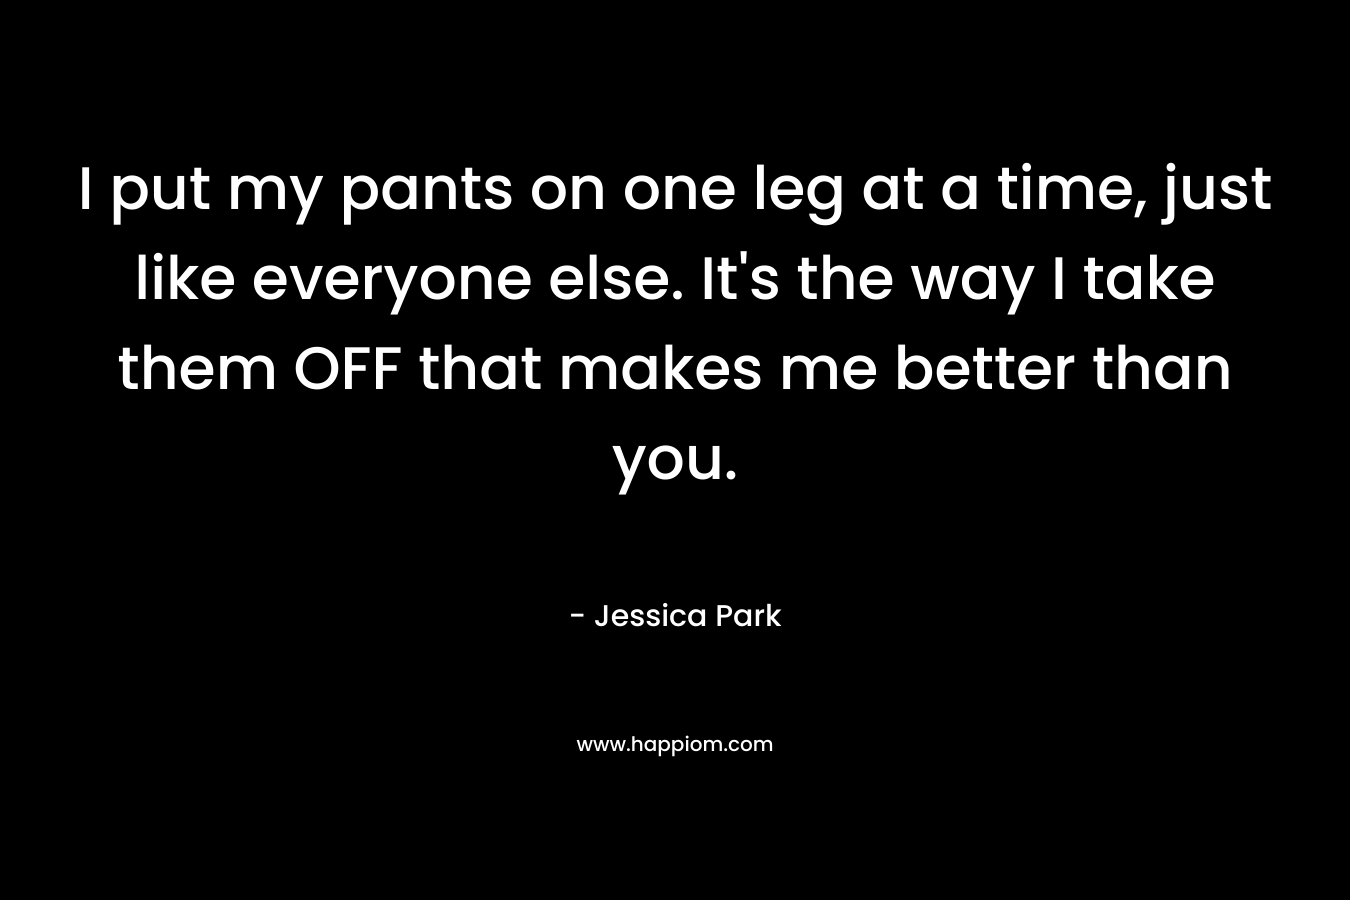 I put my pants on one leg at a time, just like everyone else. It’s the way I take them OFF that makes me better than you. – Jessica Park